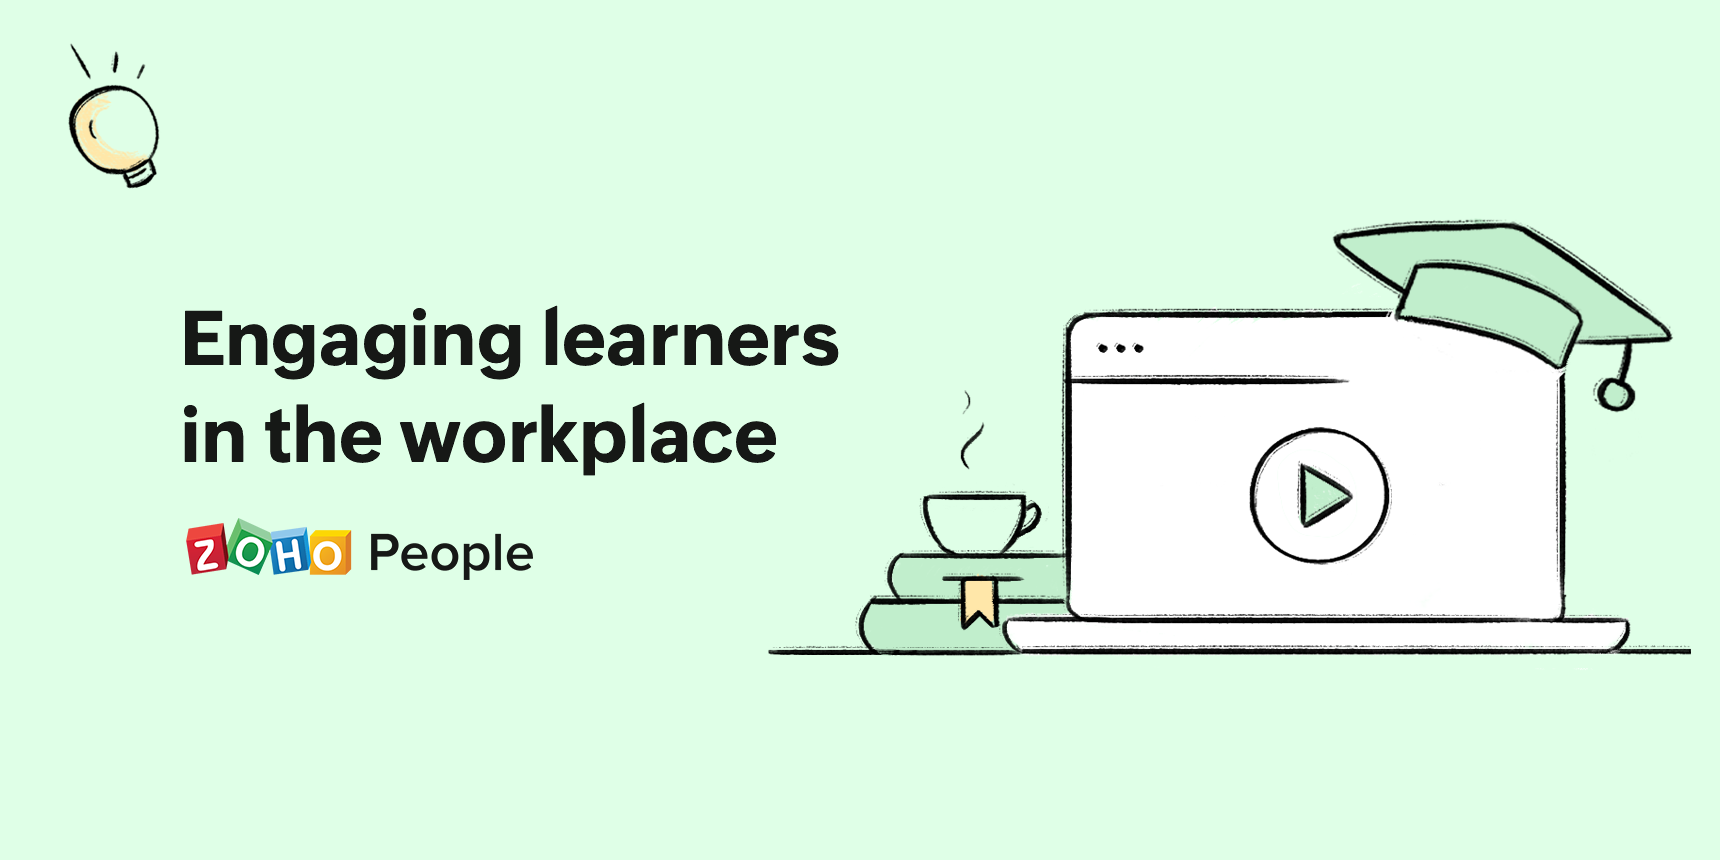 5 tips to keep learners engaged in the workplace